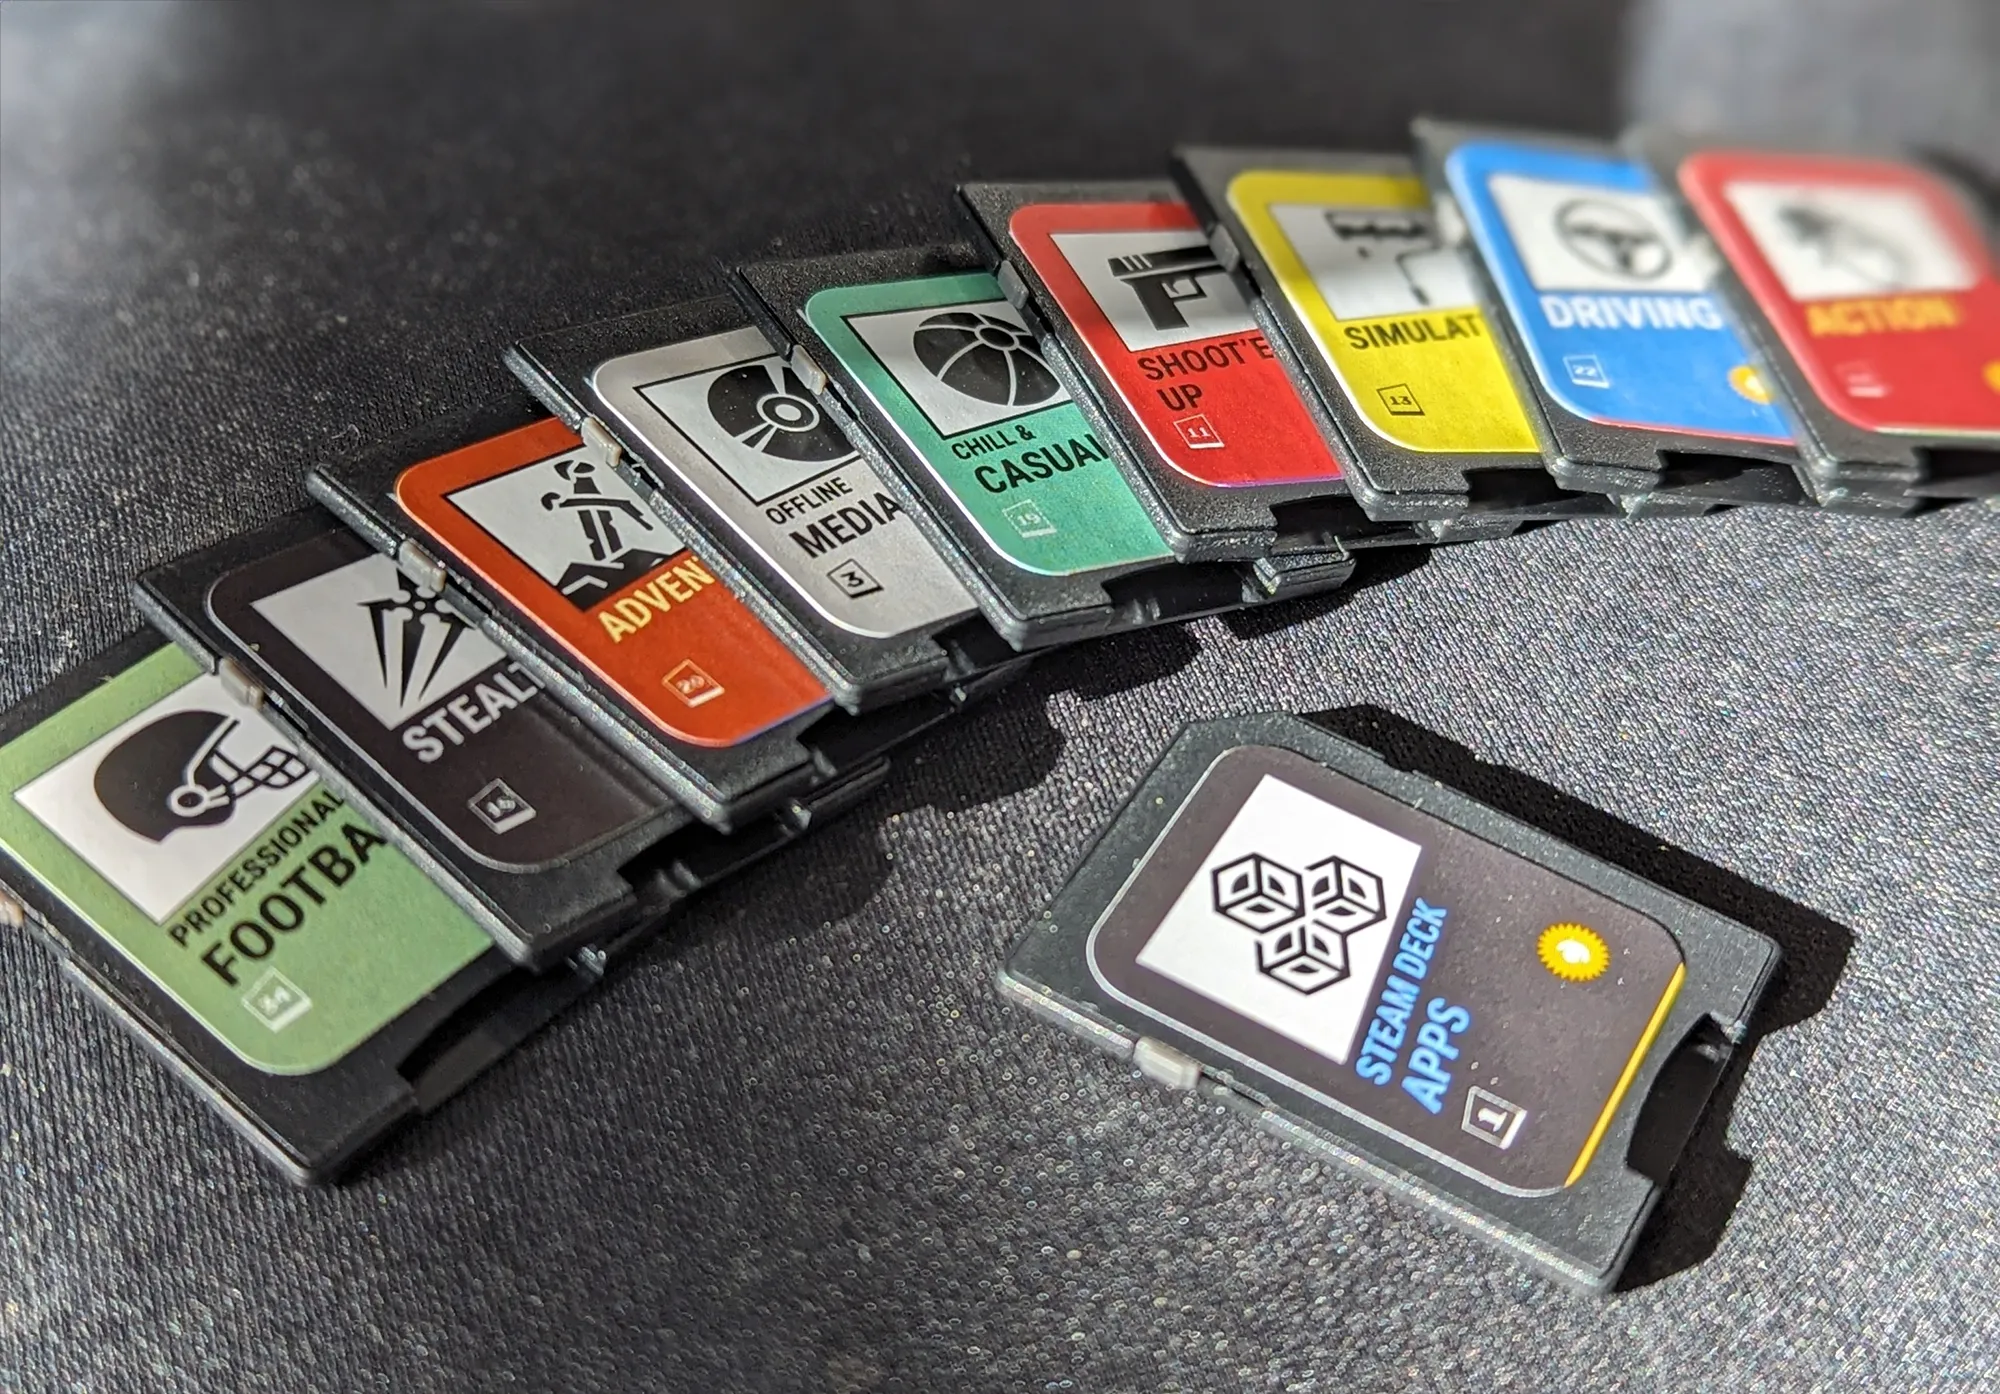 A stack of sd cards with labels